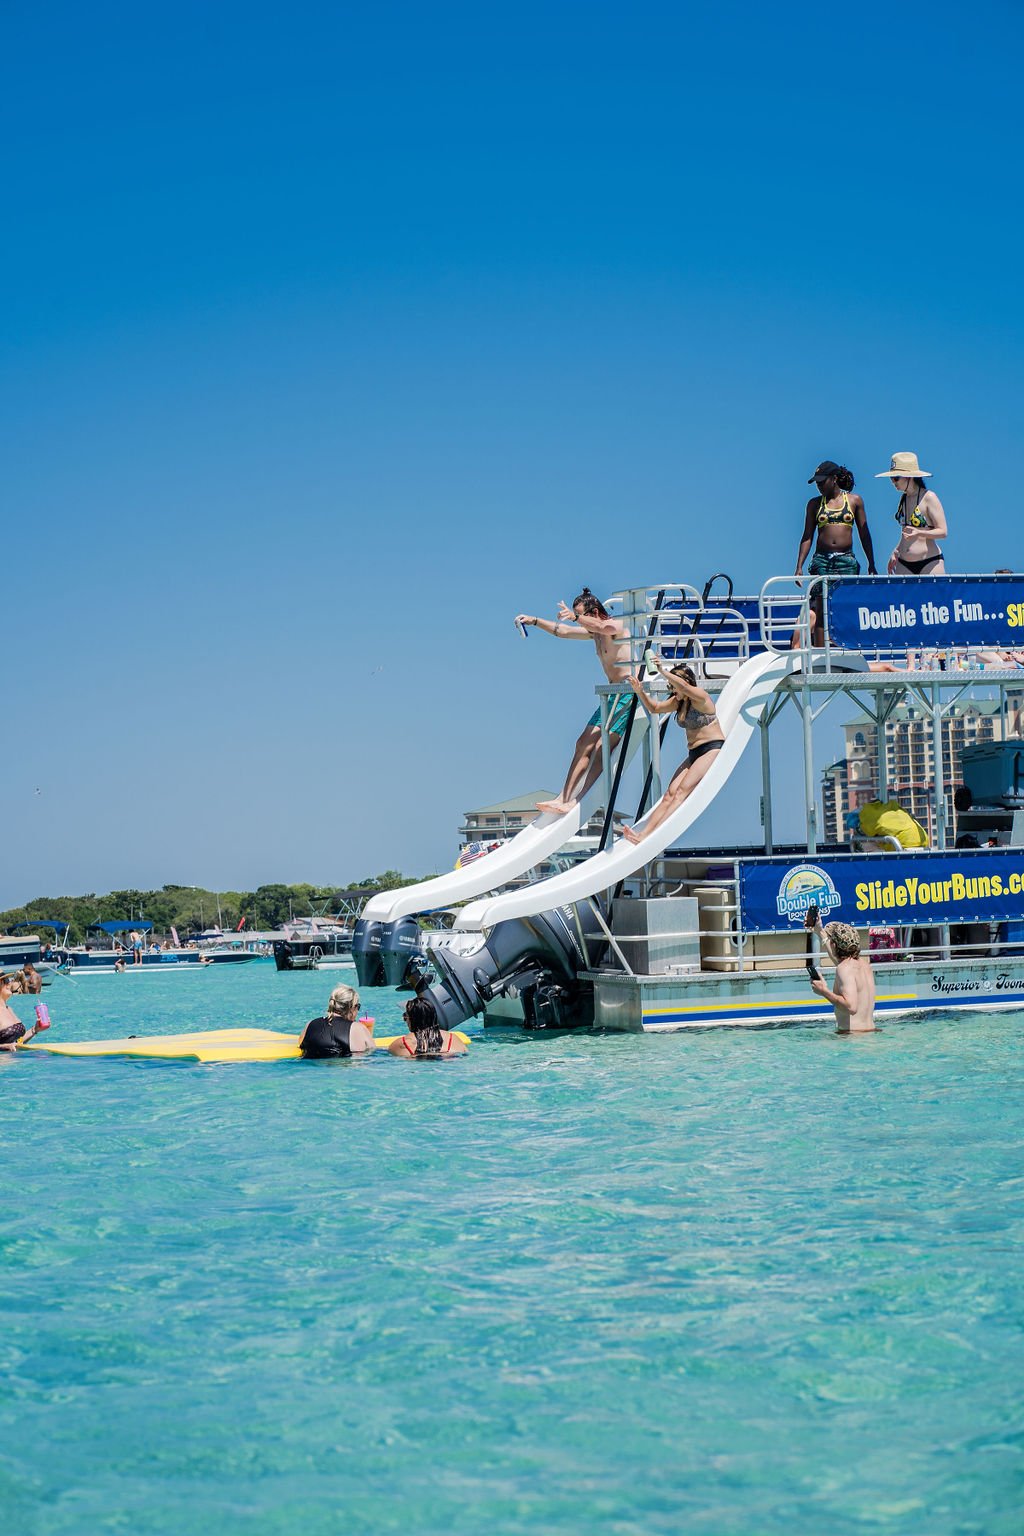 two people sliding off slides on a double decker pontoon boat in destin, florida